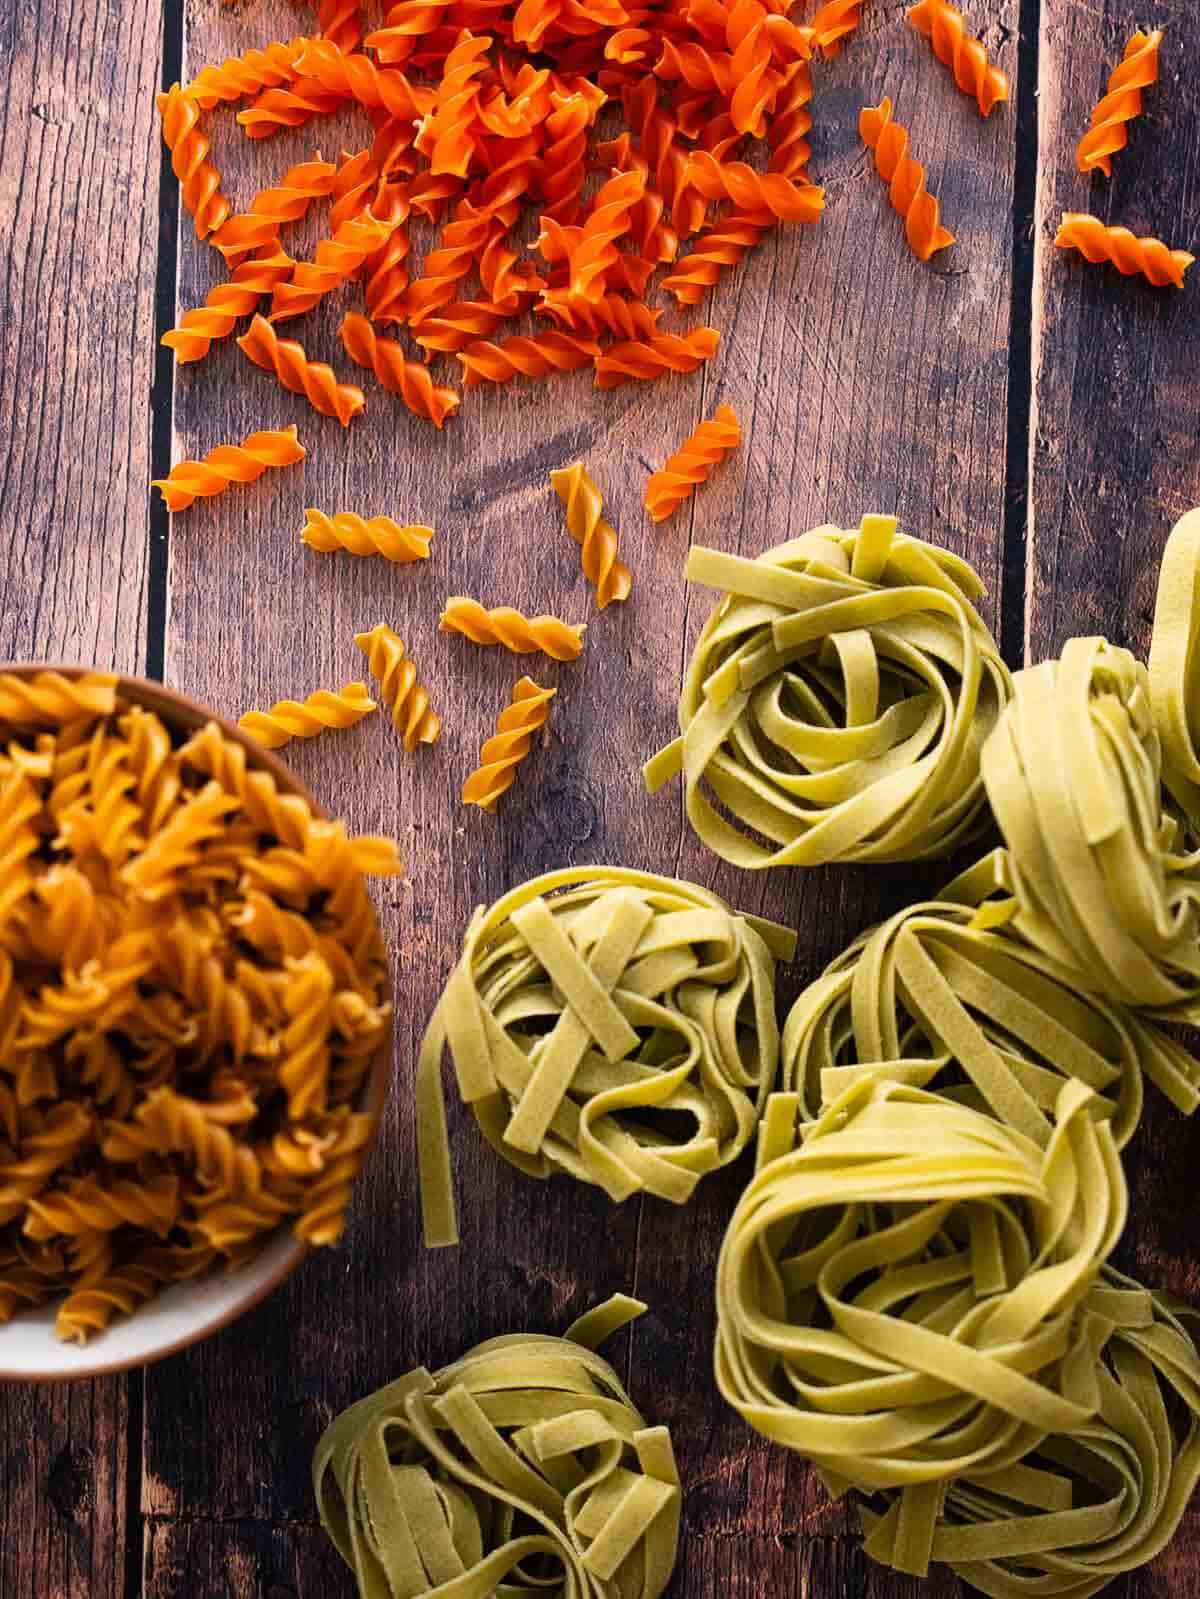 wooden table showcasing an array of alternatives types of pasta noodles such as spinach, chickpea, and red lentil fusilli.